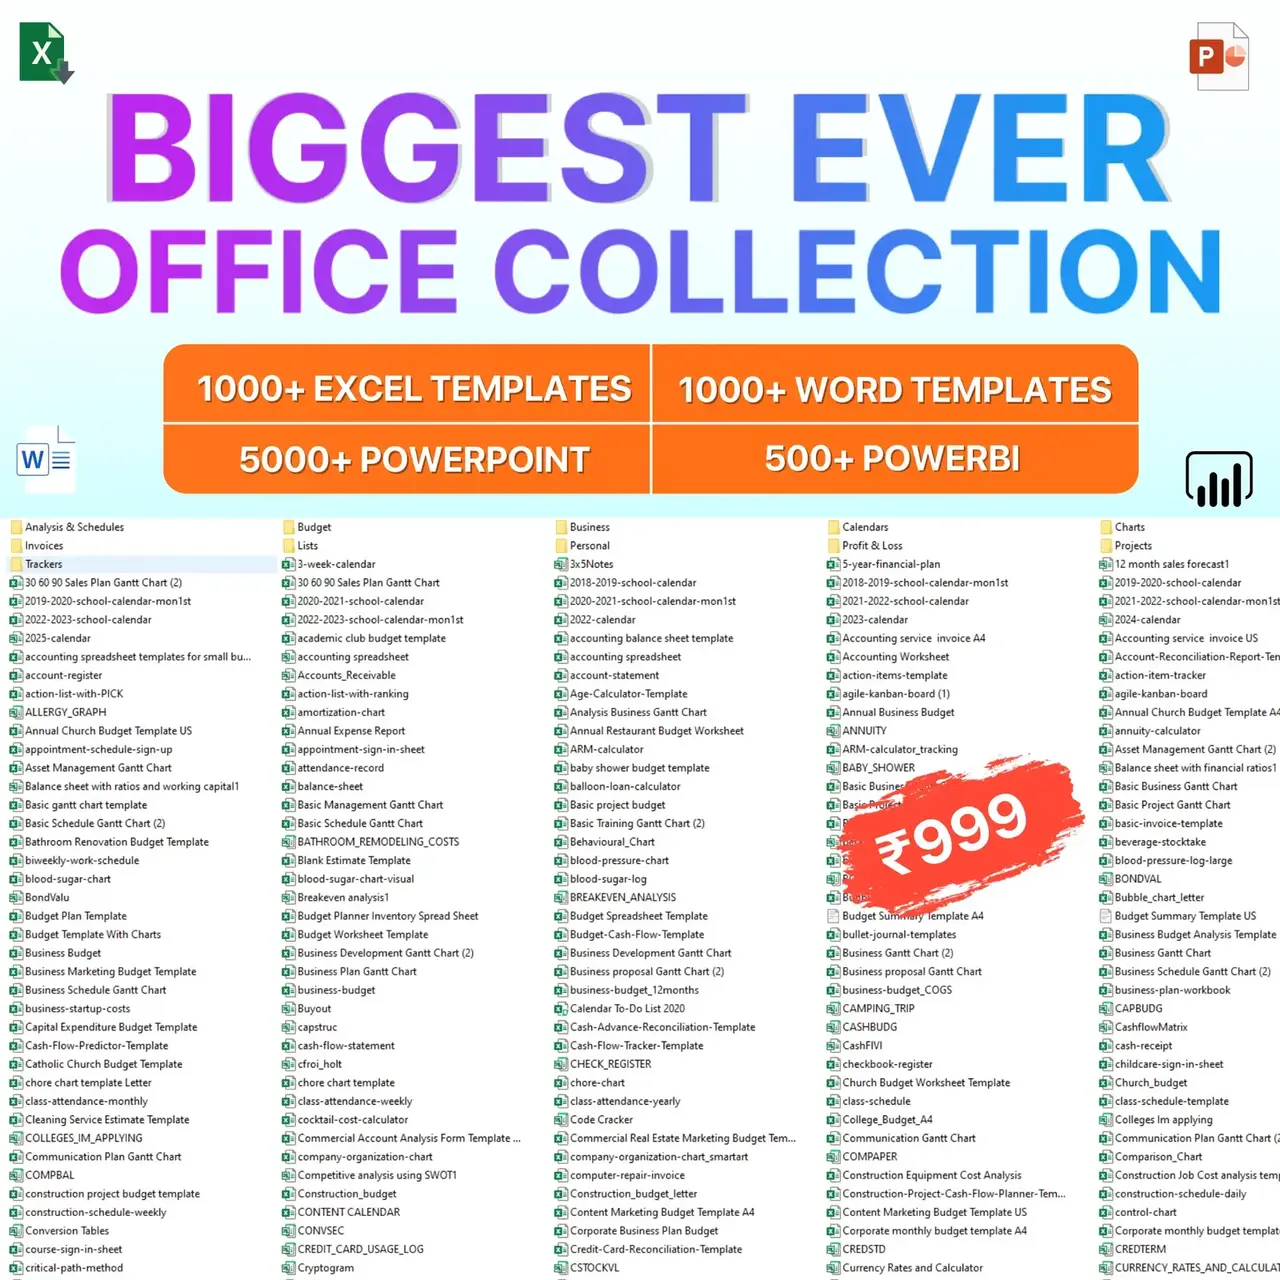 RESELL - WORLD'S BIGGEST OFFICE COLLECTION